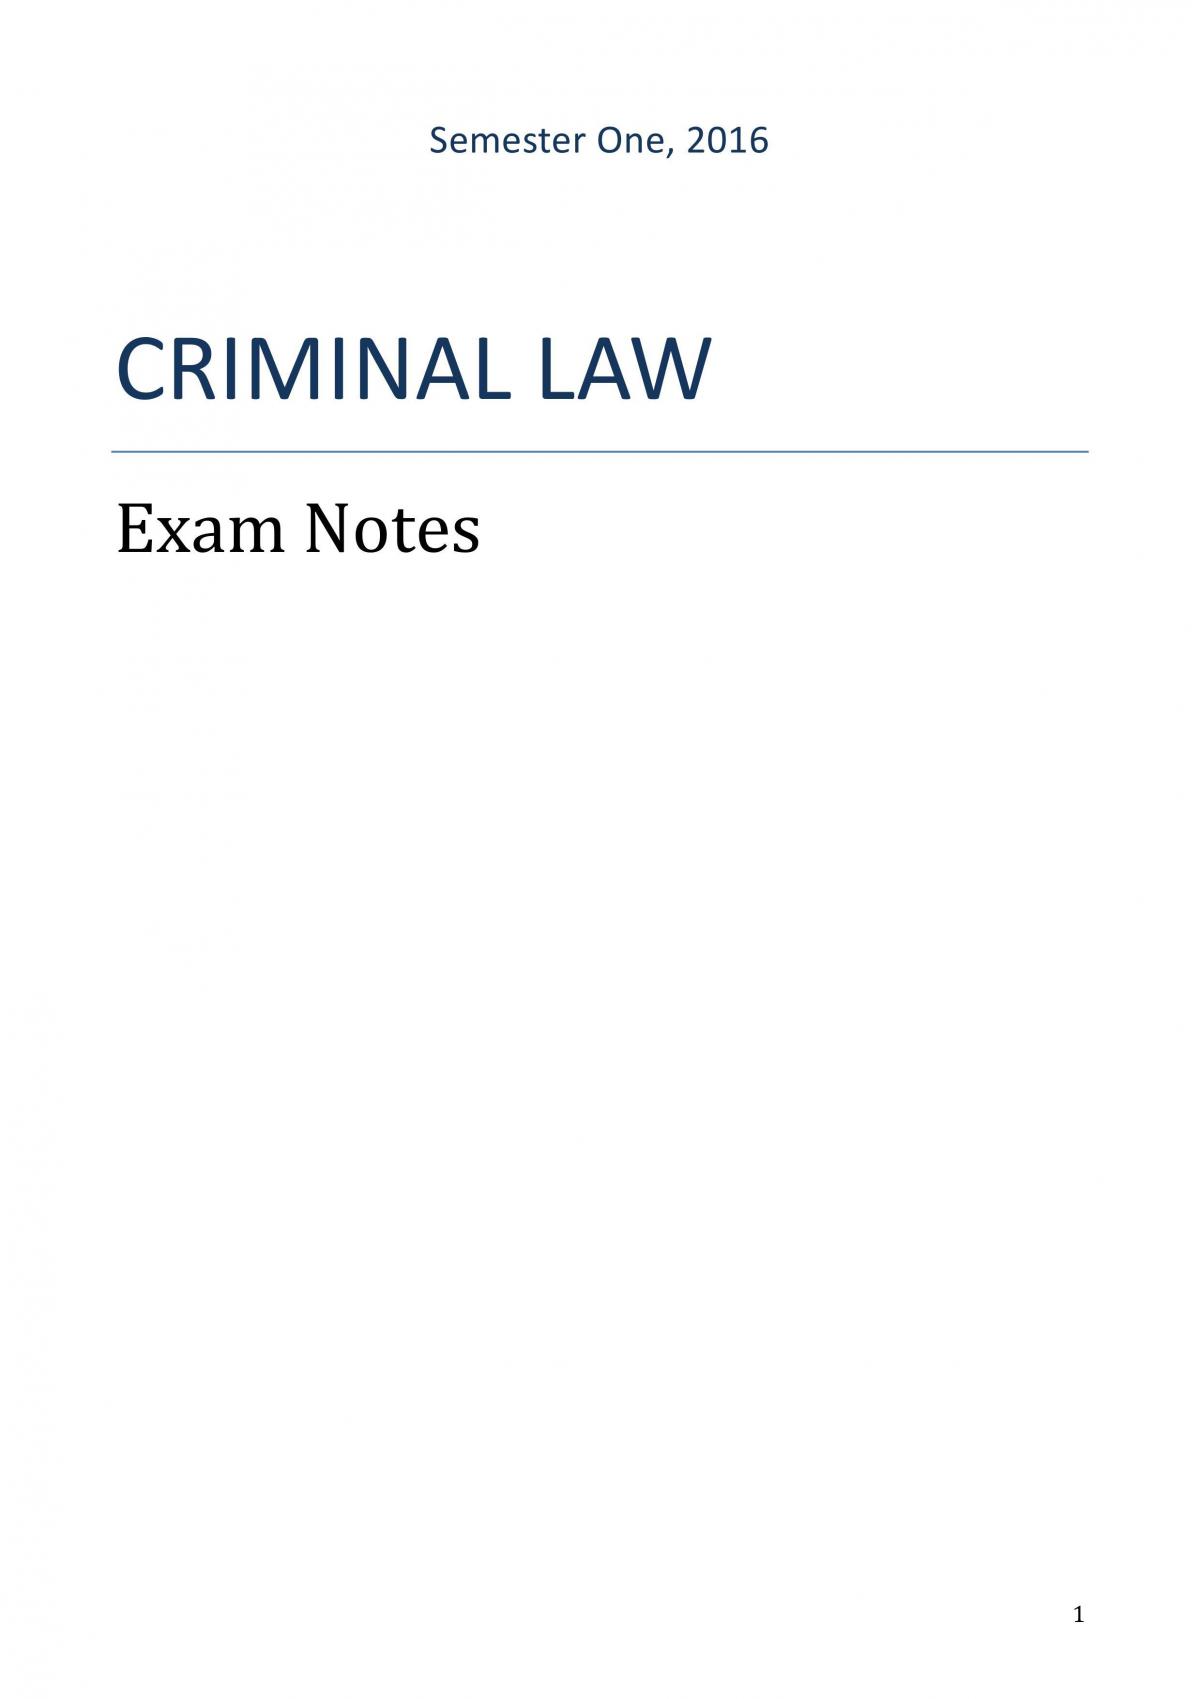 HD Student Full Criminal Law Exam Notes  - Page 1